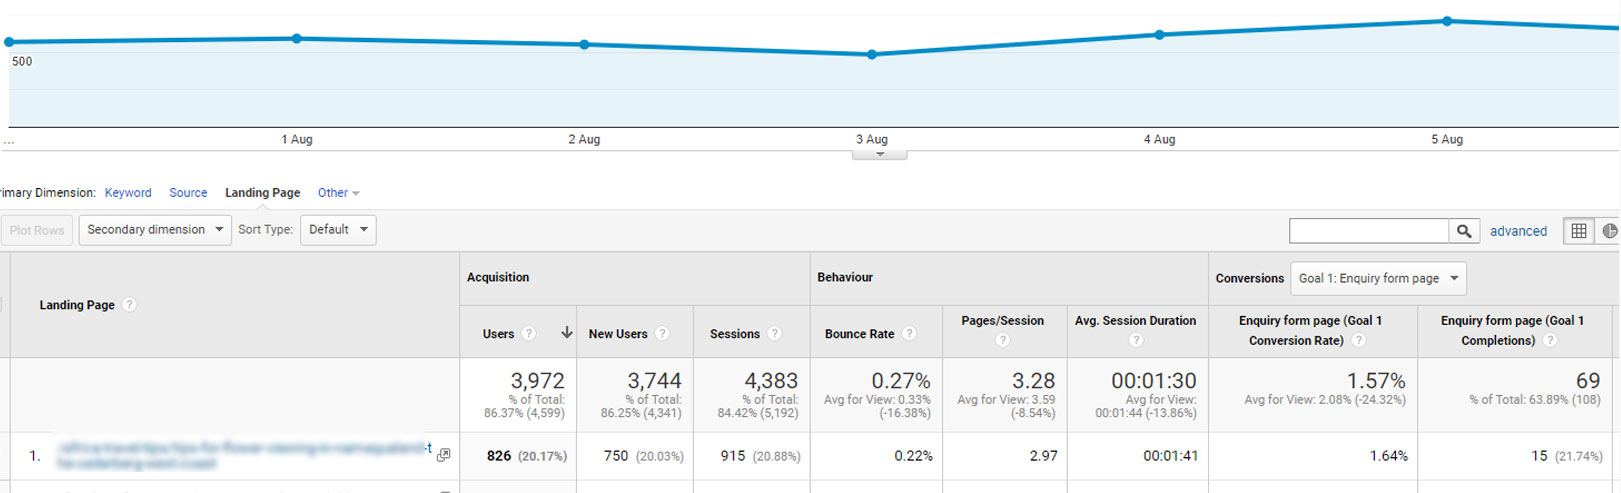 organic traffic conversion rate by landing page data view on Google Analytics